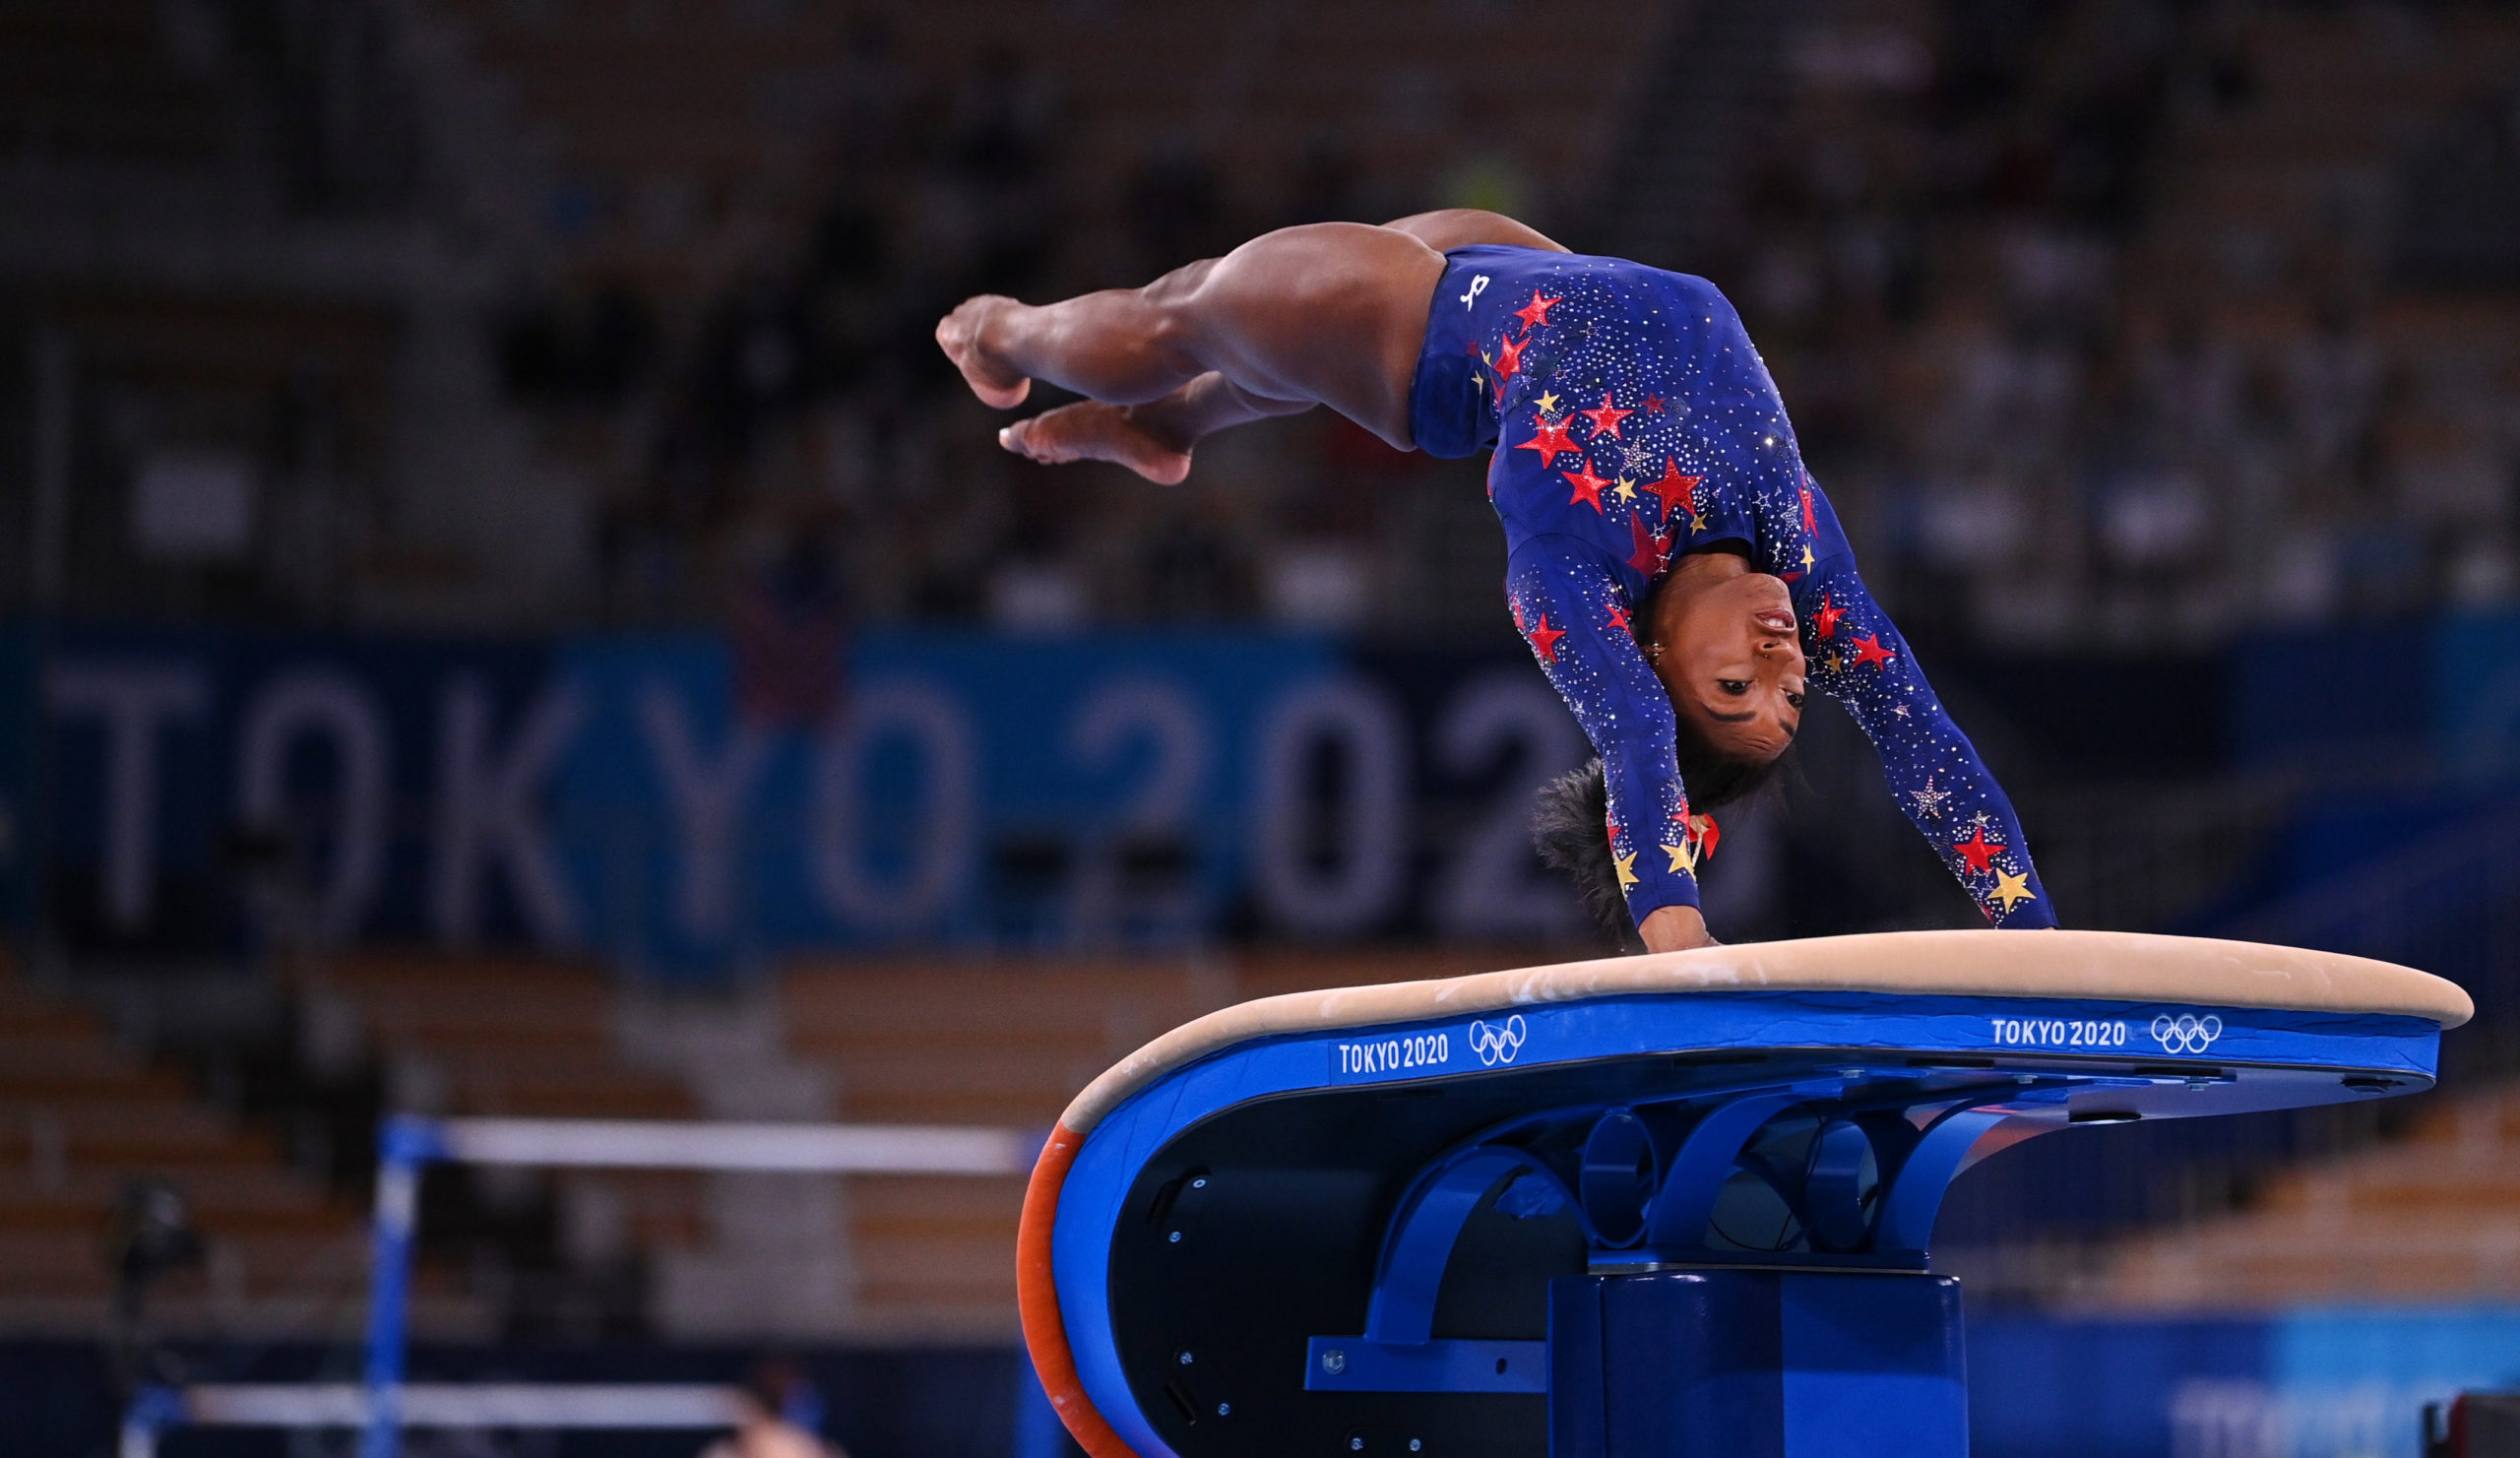 Tokyo 2020 Olympics - Gymnastics - Artistic - Women's Vault - Qualification - Ariake Gymnastics Centre, Tokyo, Japan - July 25, 2021. Simone Biles of the United States in action on the vault. REUTERS/Dylan Martinez